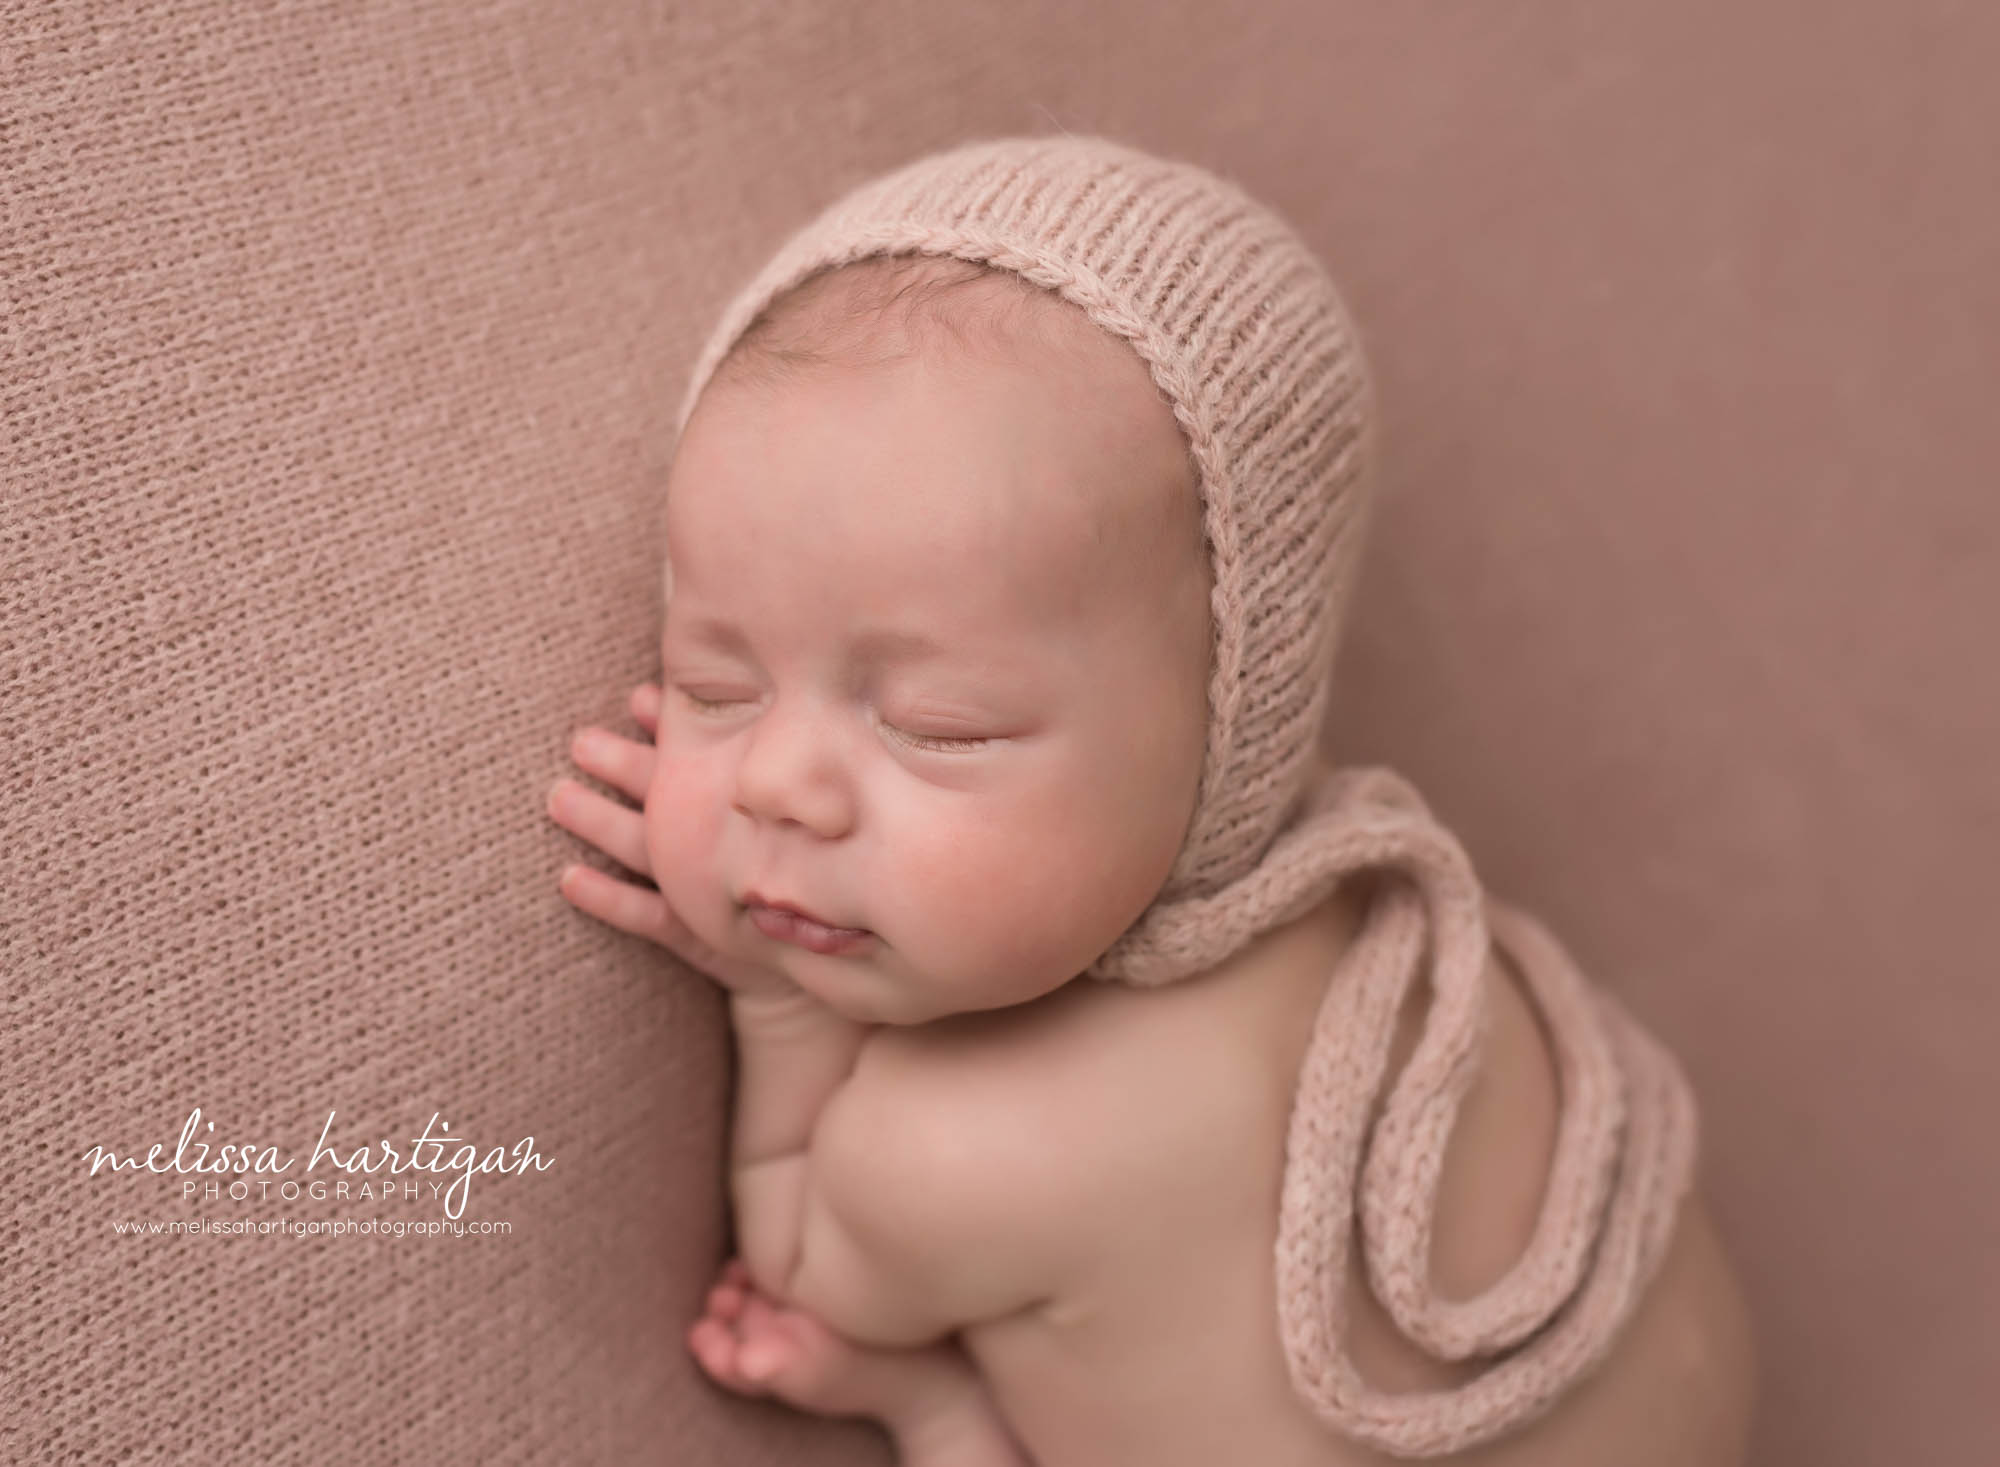 newborn baby girl posed on pink backdrop wearing knitted bonnet